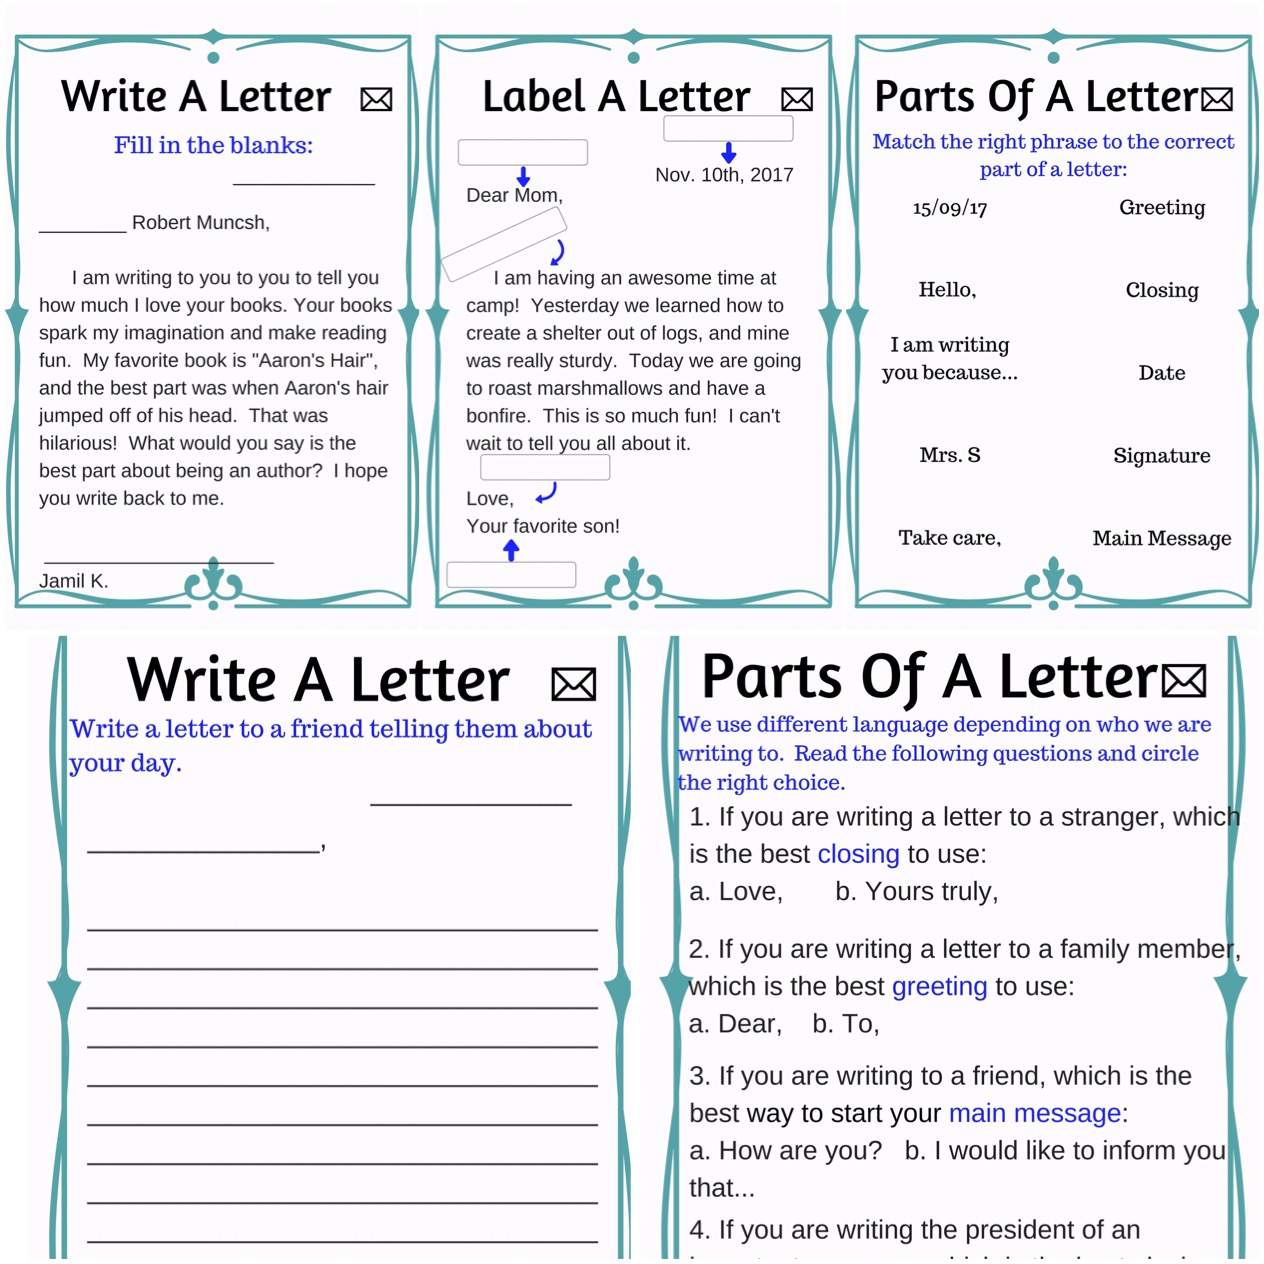 Parts Of A Letter from www.myeverydayclassroom.com